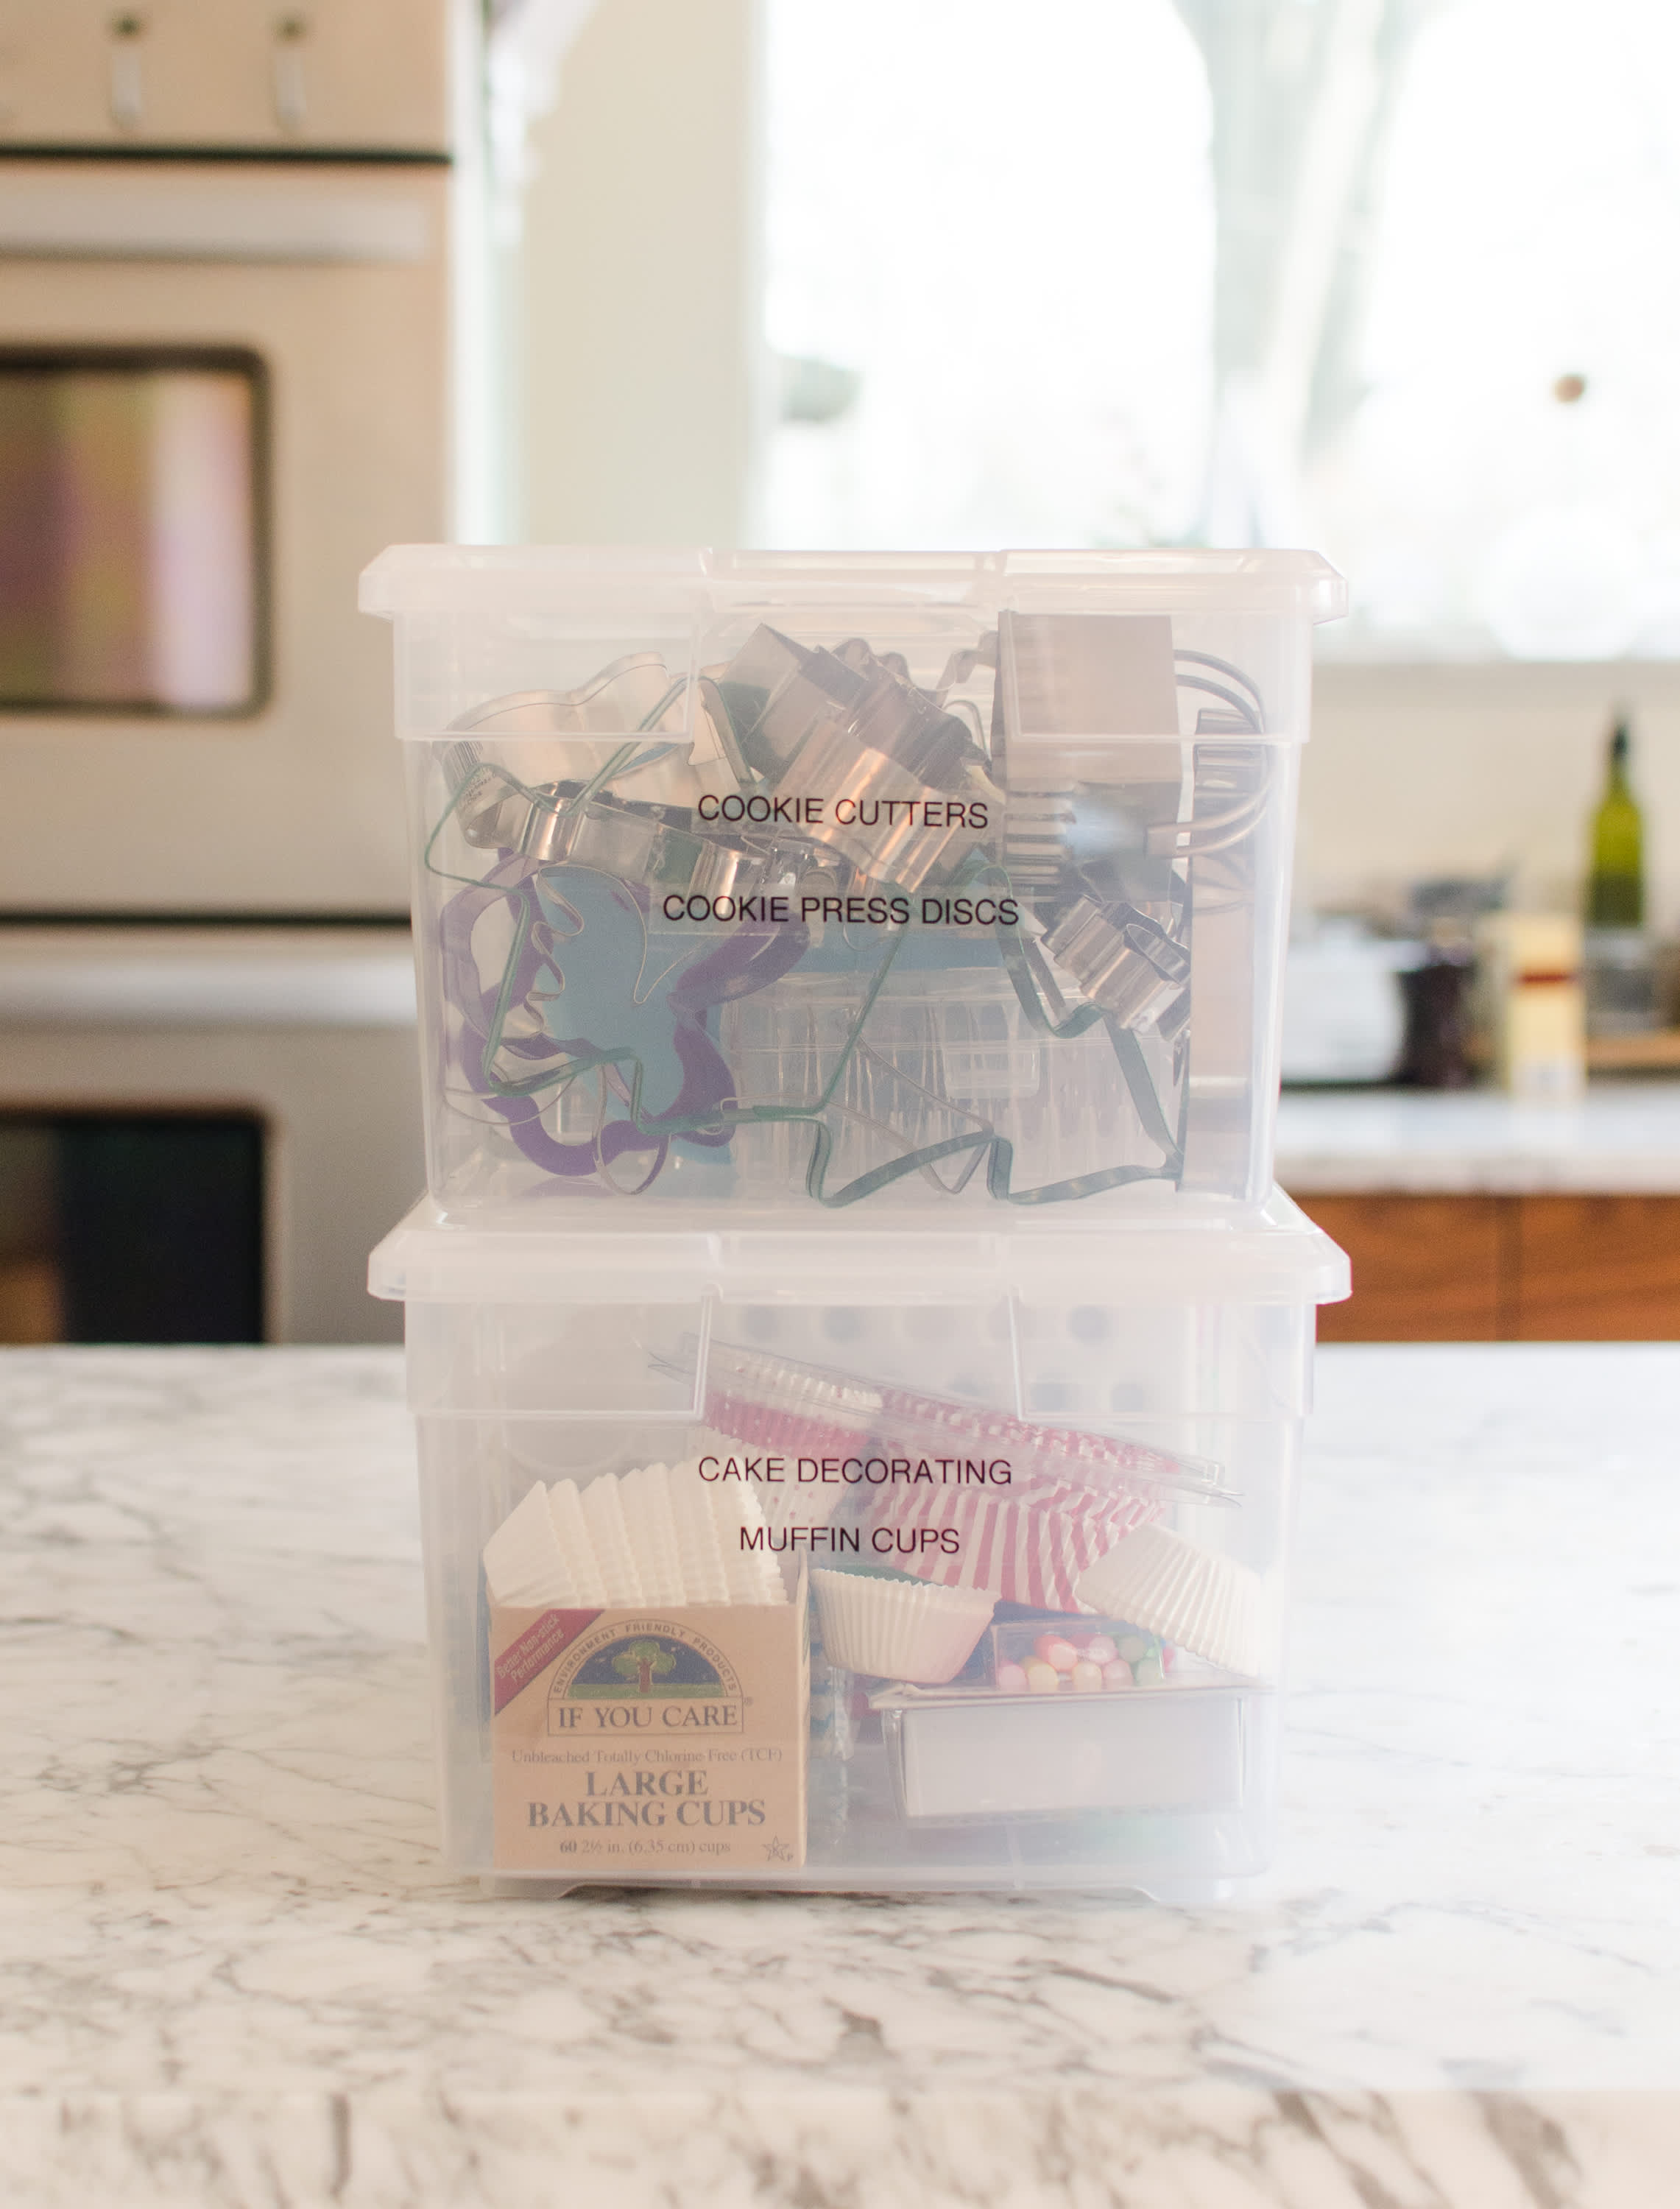 The Best Way to Organize Your Cookie Cutter Collection